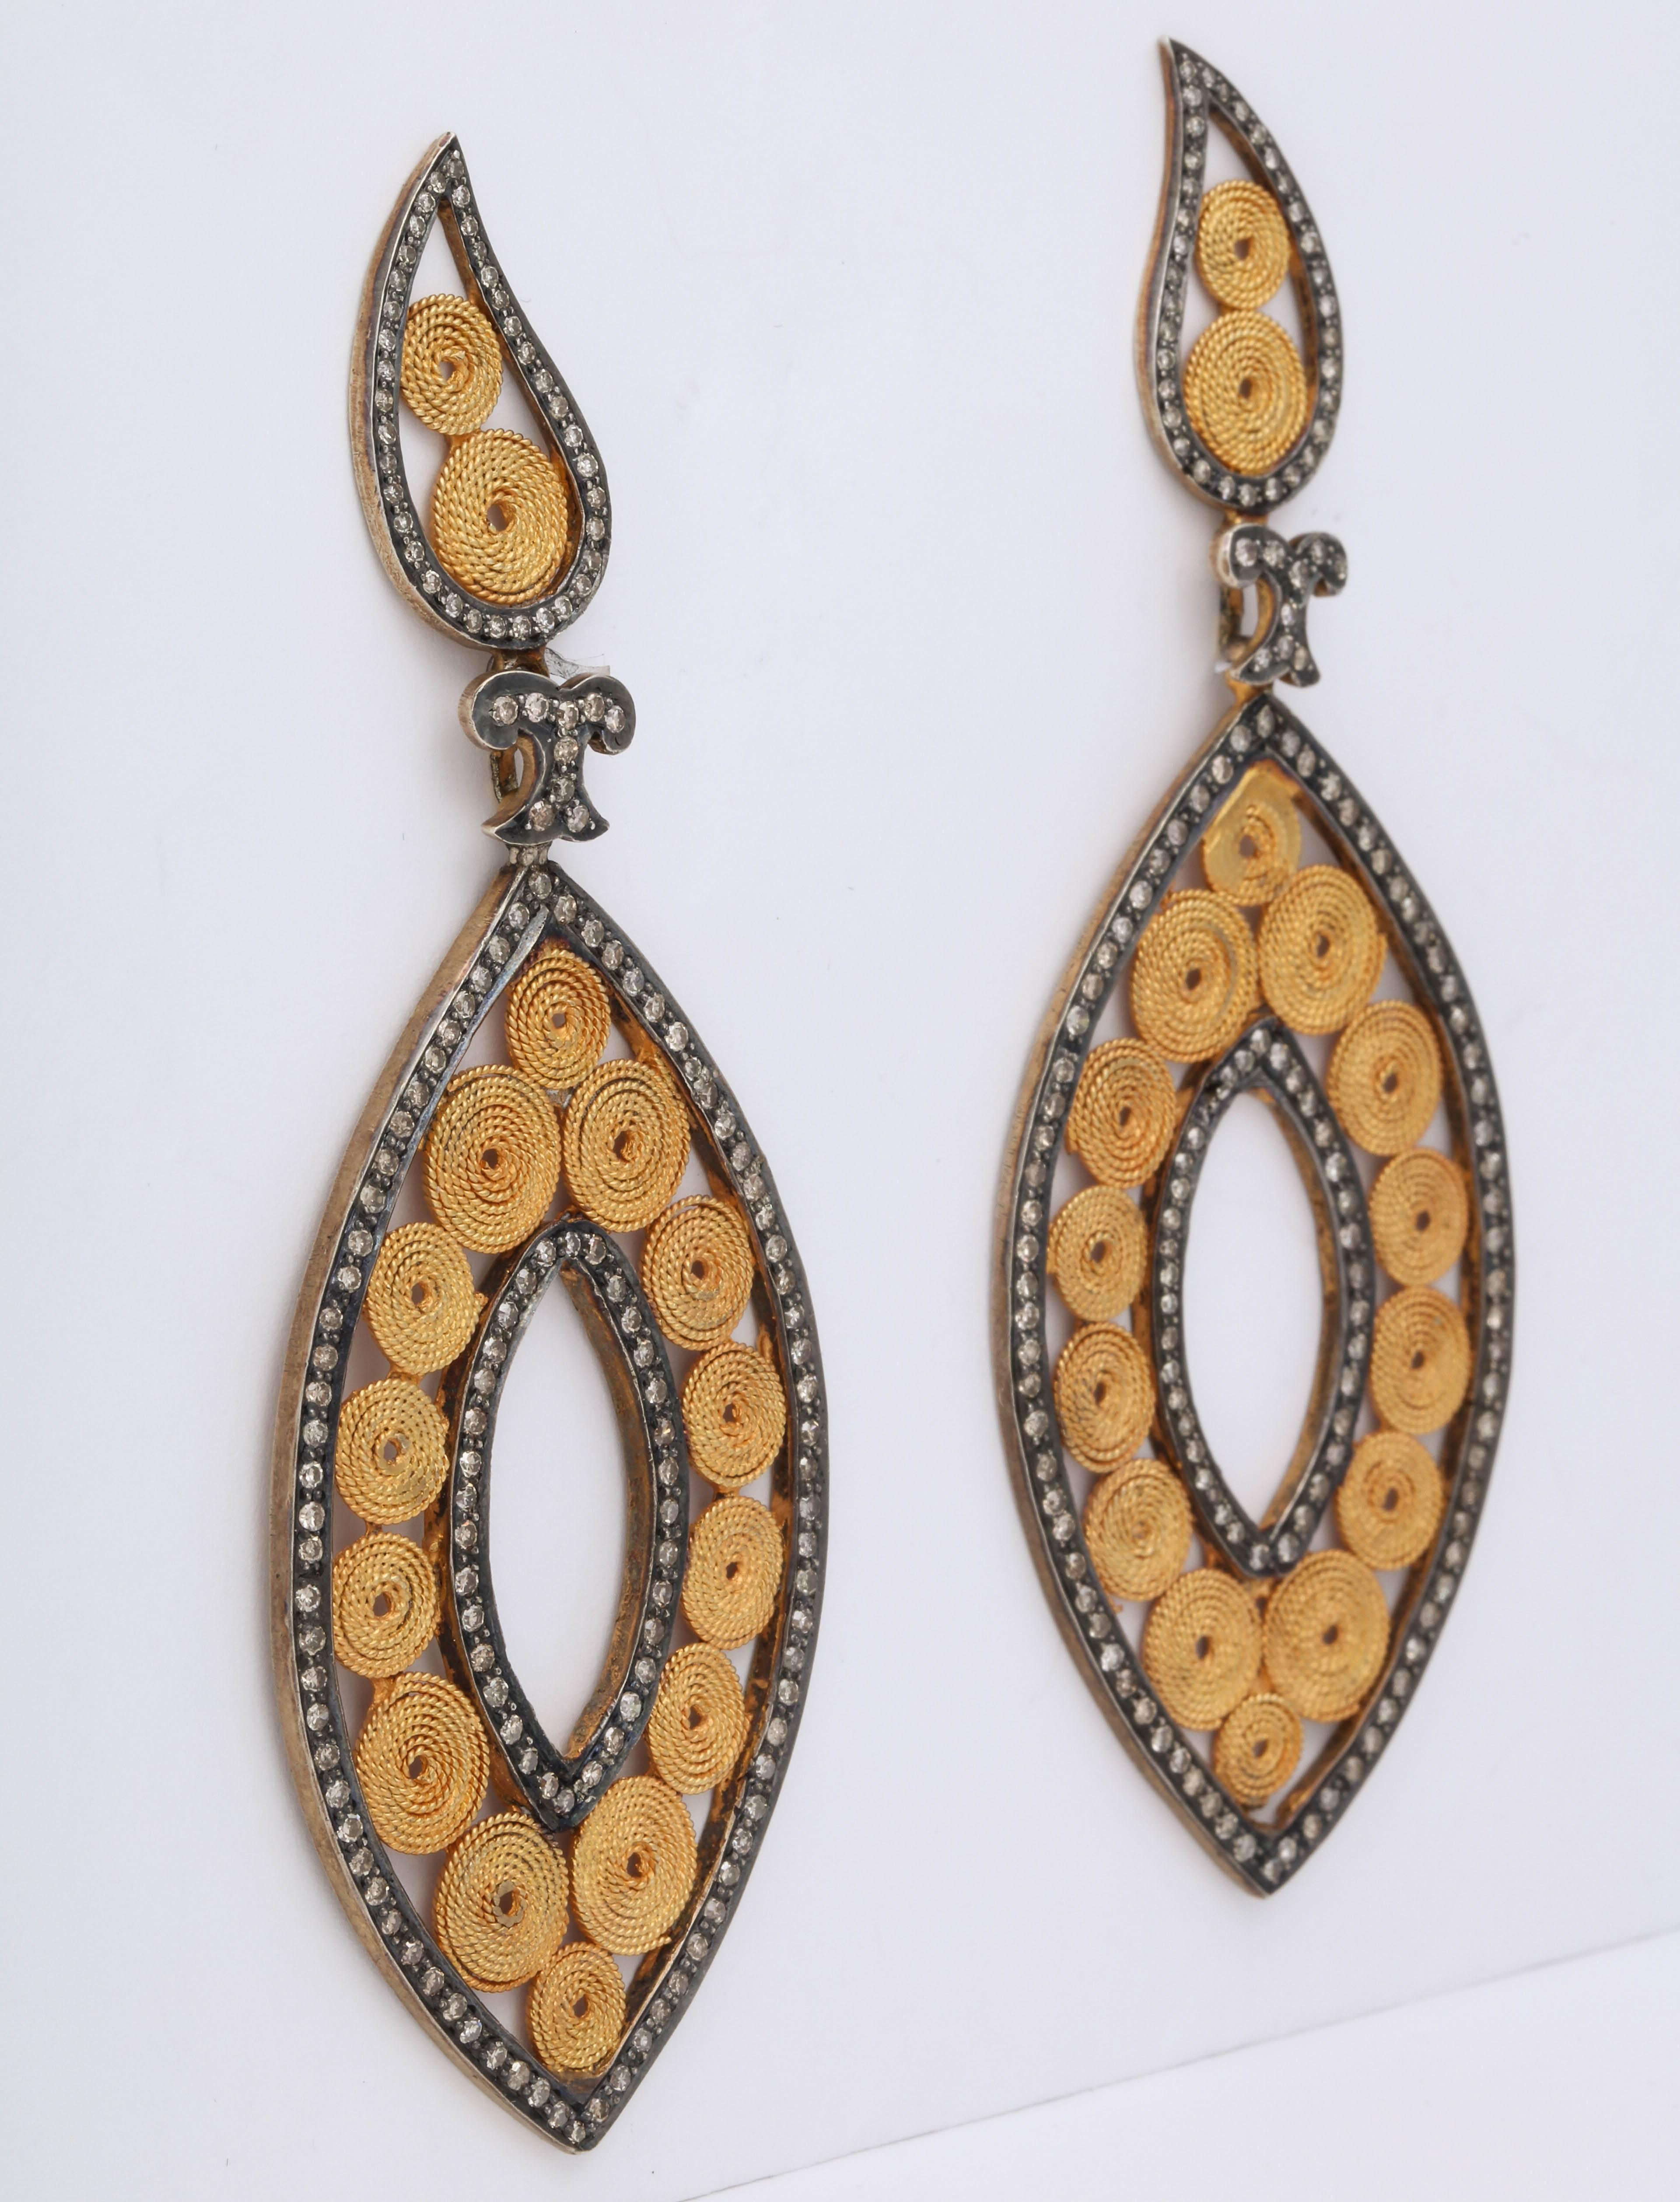 A pair of earrings composed of 18kt yellow gold coiled wire discs set into rhodium plated sterling silver paisley and navette frames set with diamonds.  There are 2.65cts of diamonds.
LengthL 3.52 inches
Width of navette: 1.26 inches
Length of